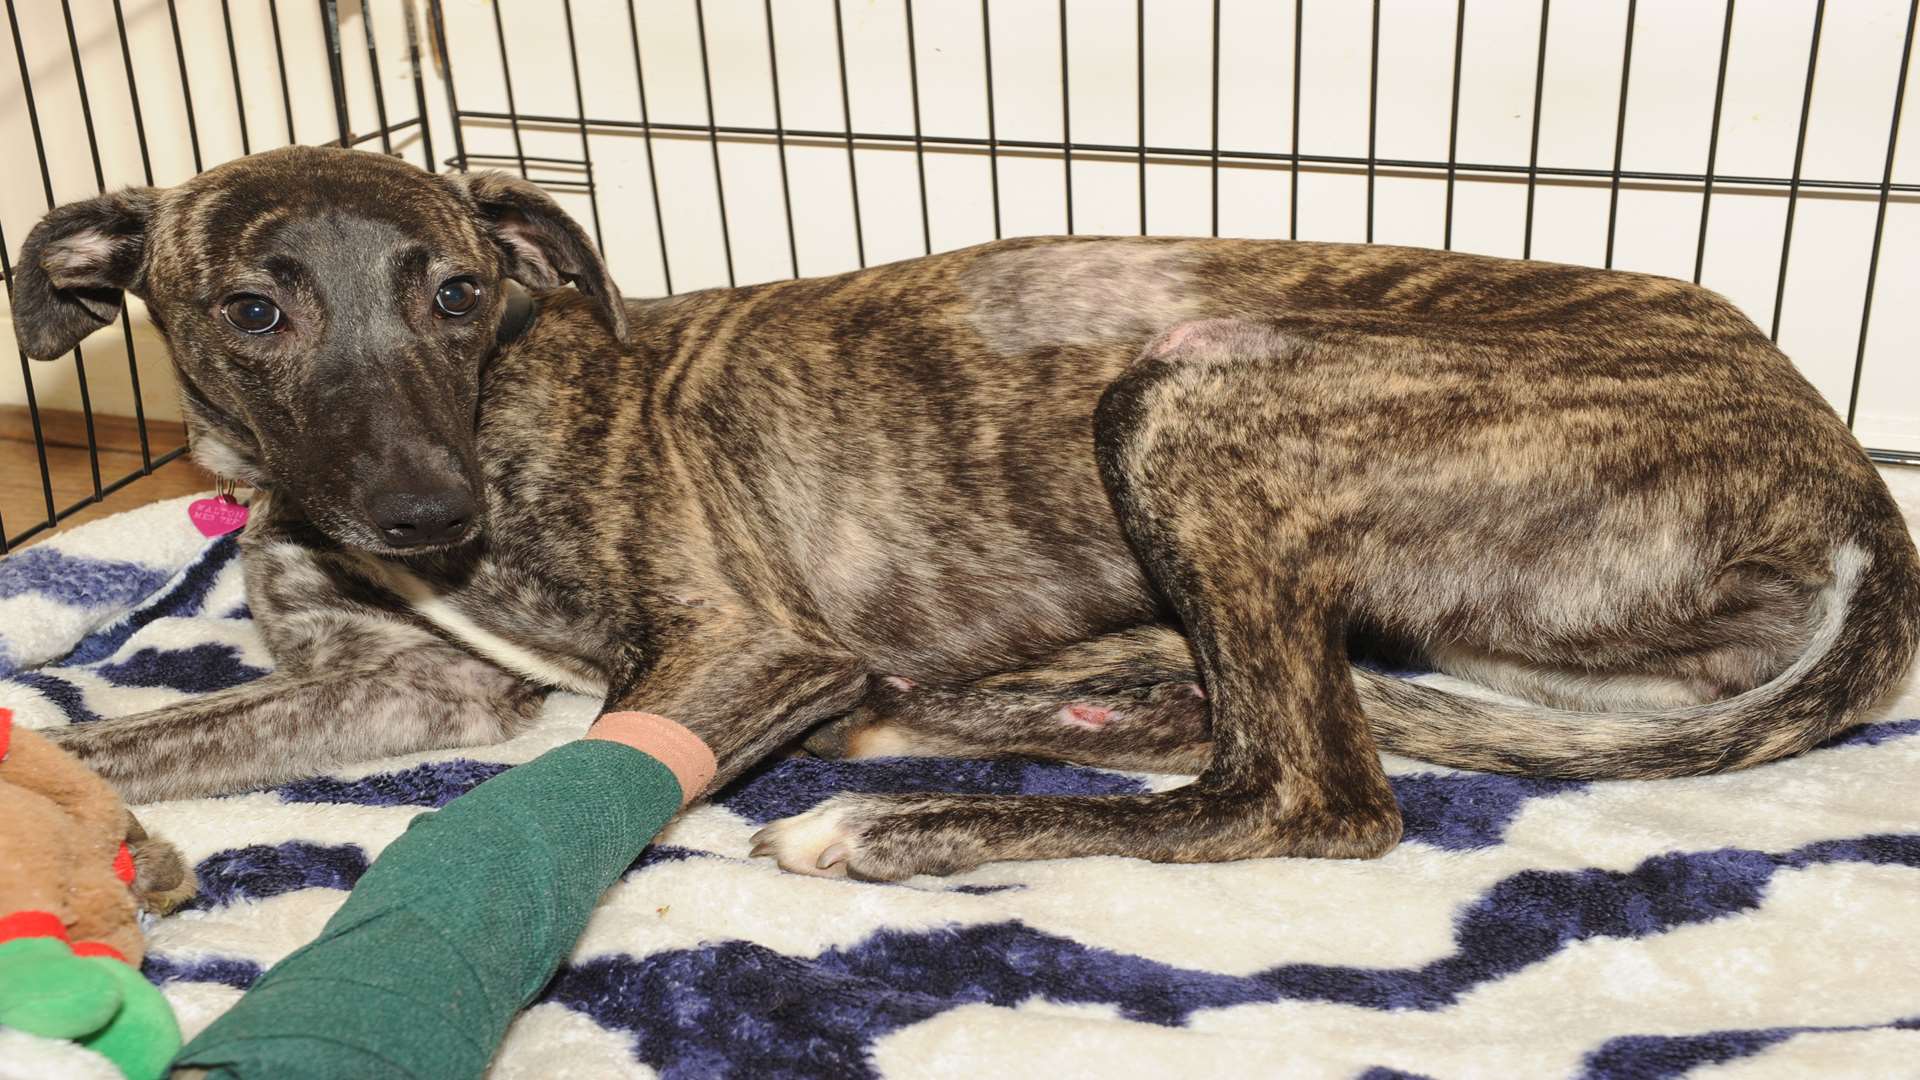 Your greyhound-lurcher cross belle was found with a broken leg and internal wounds, by the roadside